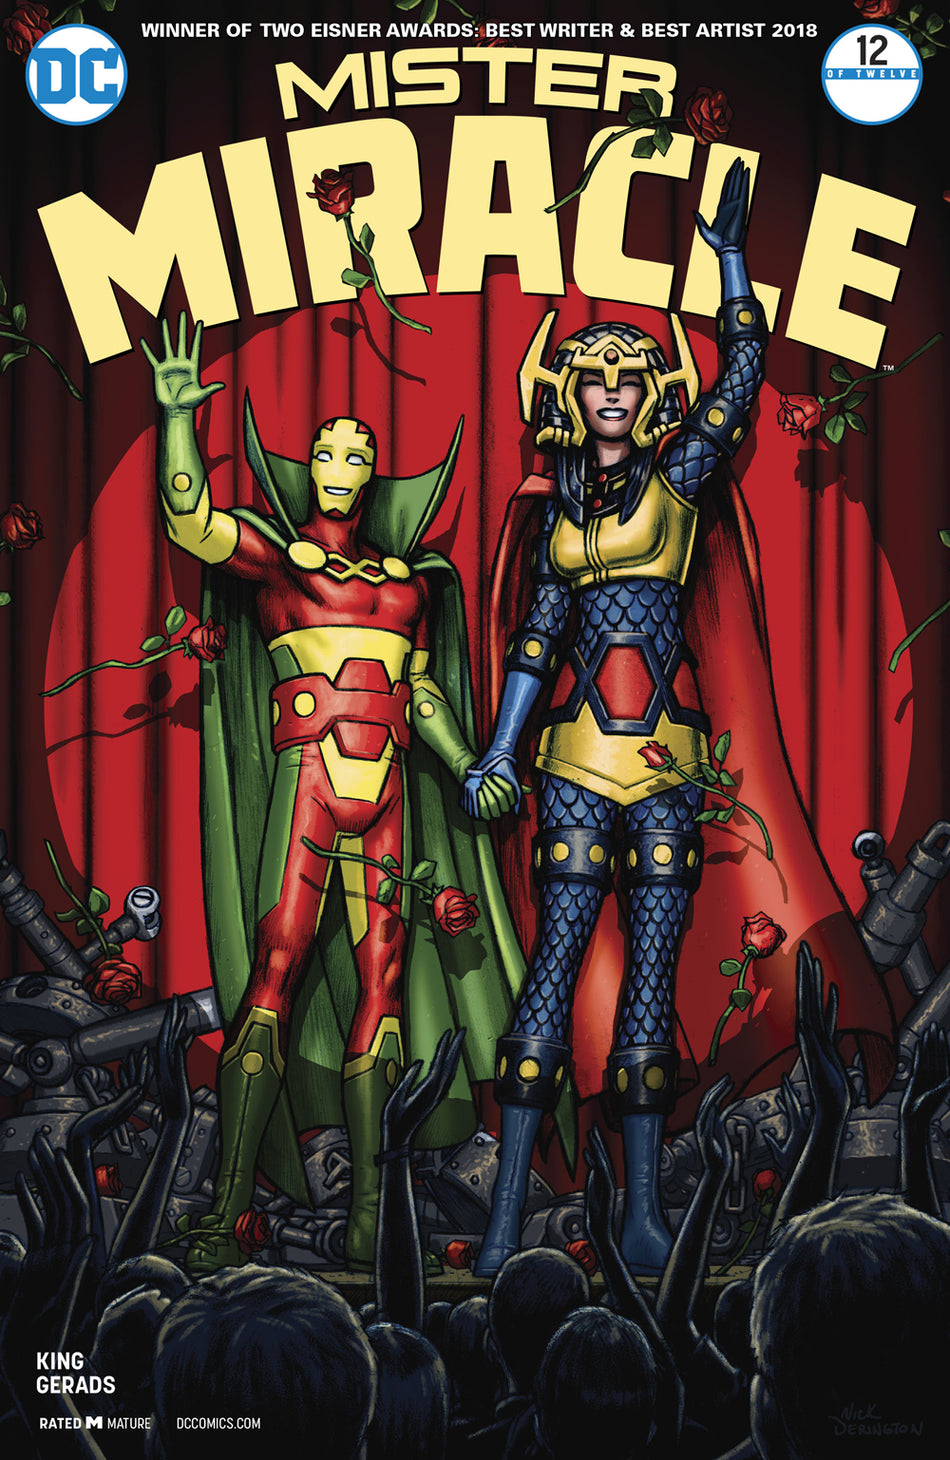 Photo of Mister Miracle Issue 12 (of 12) comic sold by Stronghold Collectibles